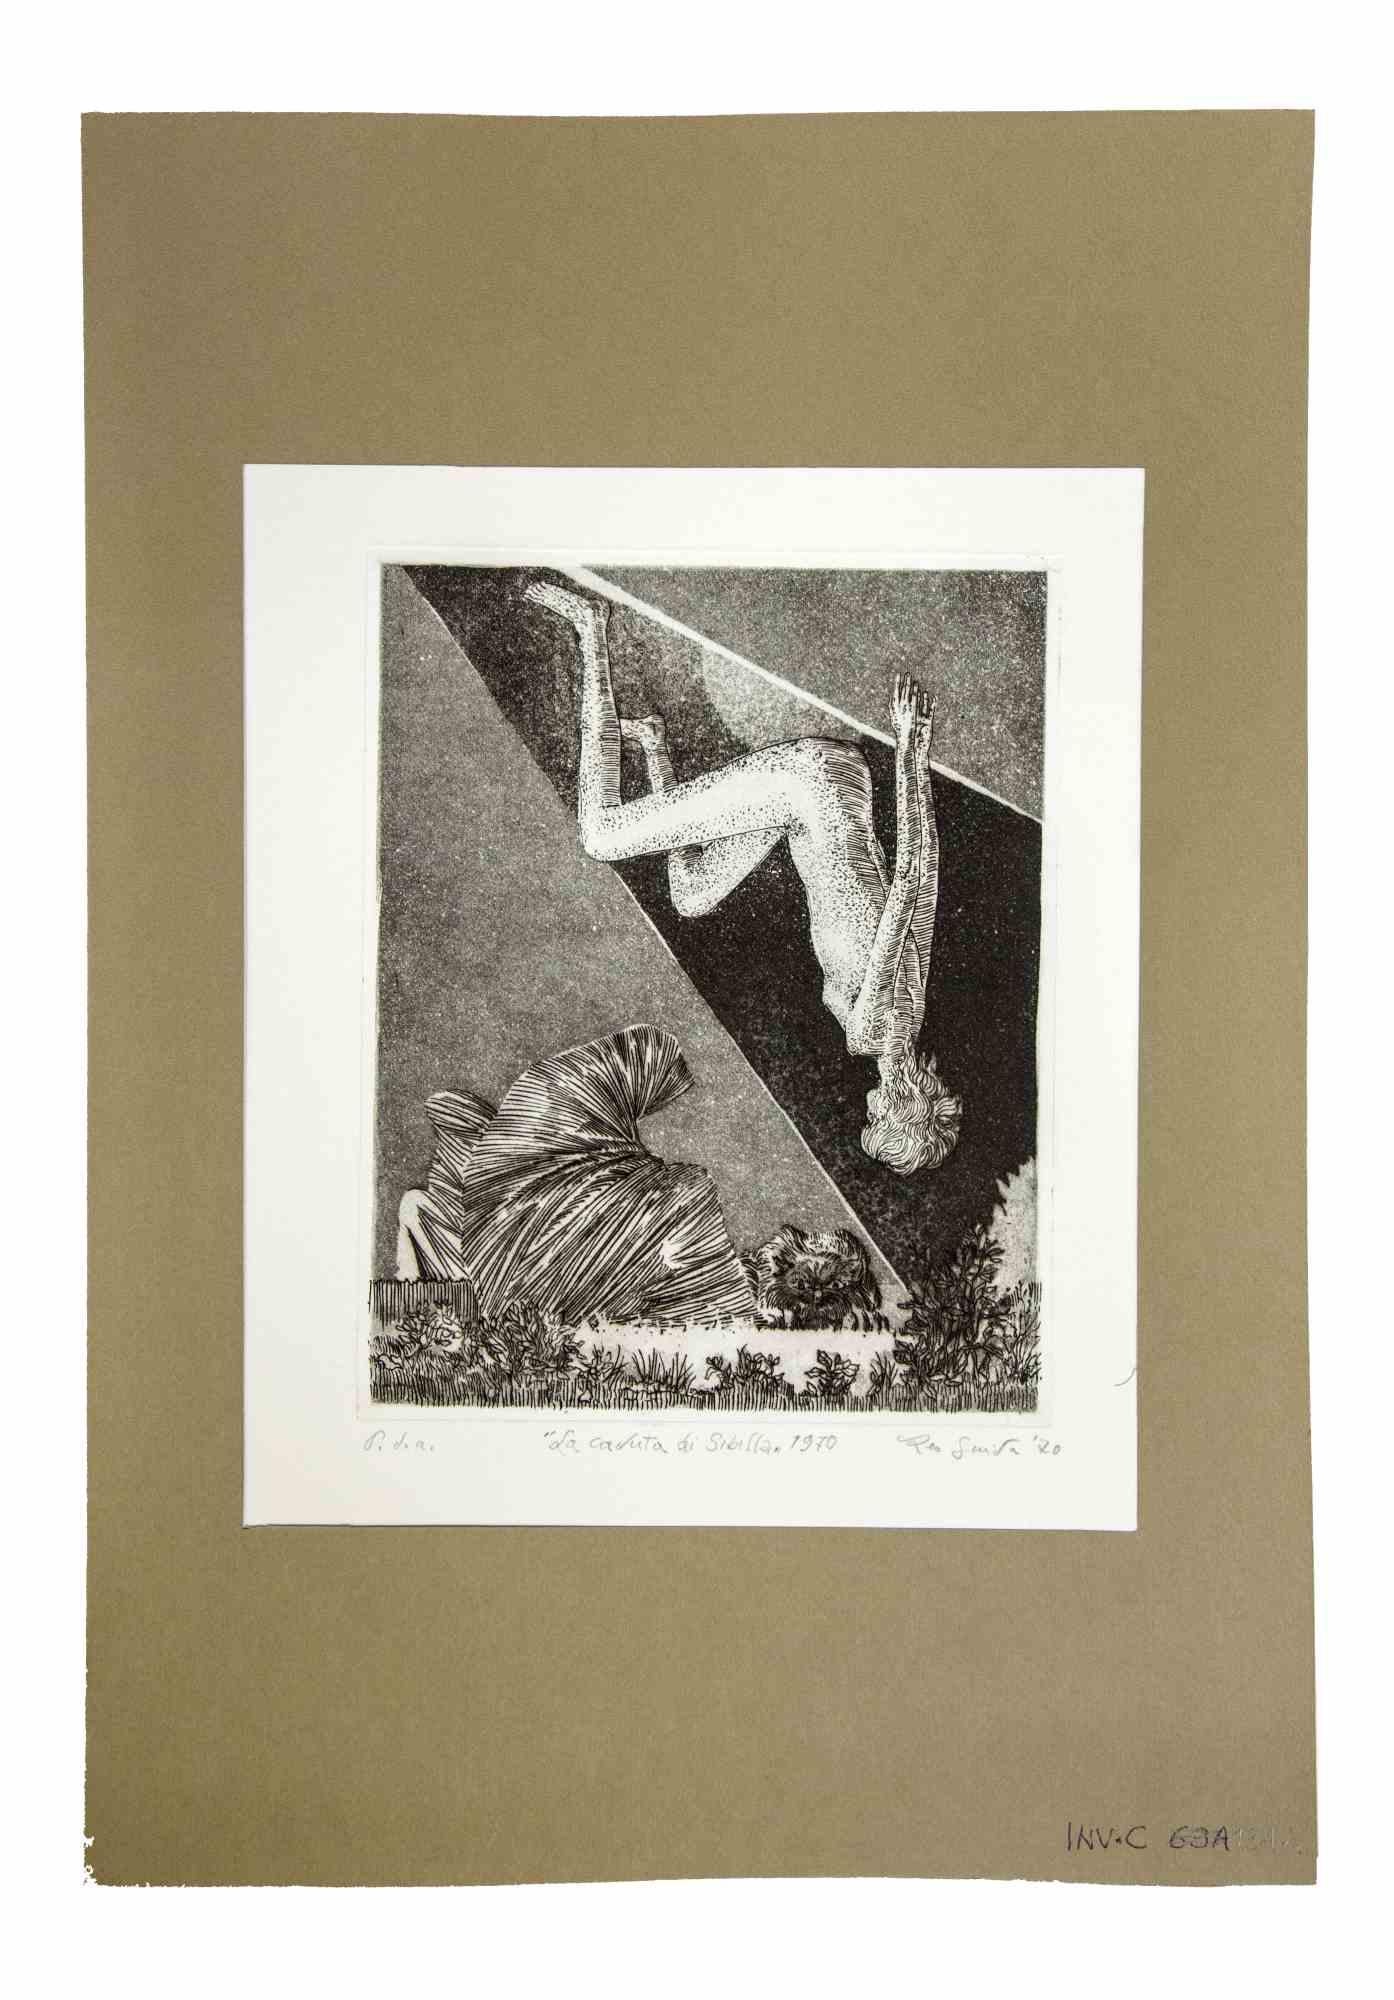 The Fall of Sibyl is an original etching and aquatint realized by Leo Guida in 1970.

Bon état.

Mounted on a white cardboard passpartout (50x35) 

Dated and signed by the author.

Leo Guida  (1992 - 2017). Sensitive to current issues, artistic